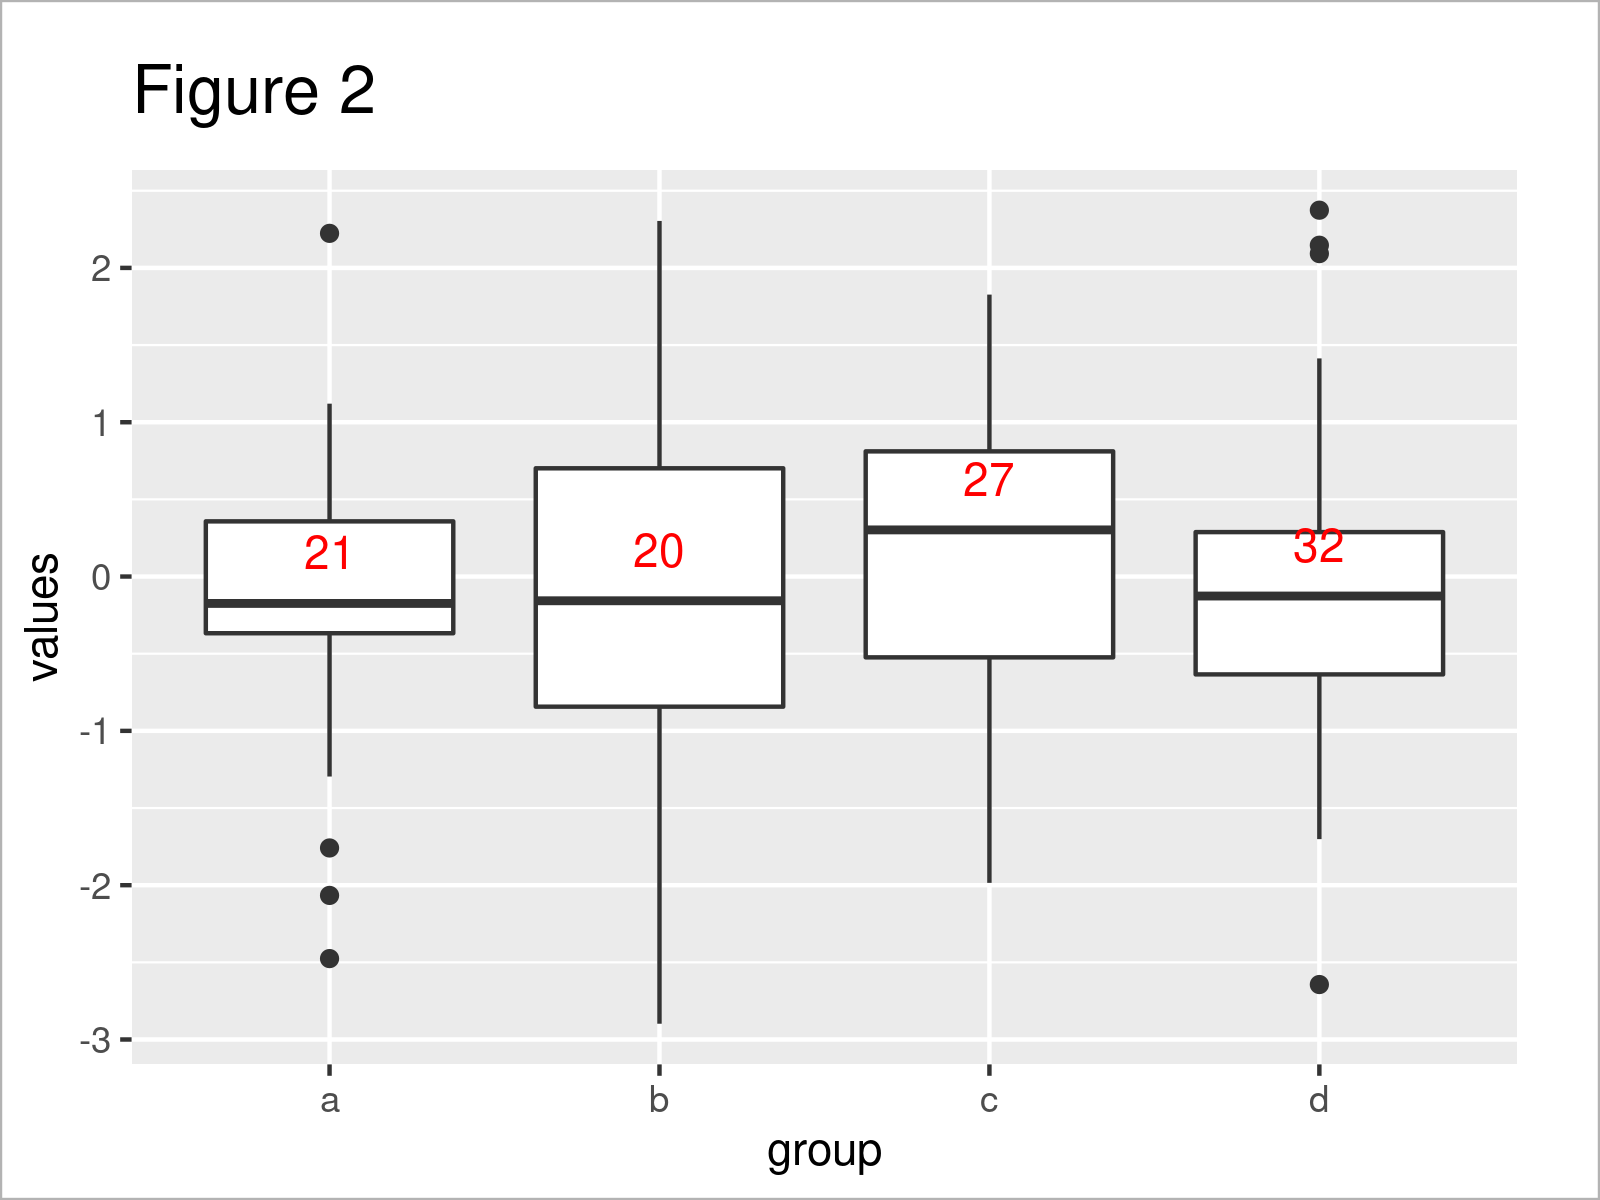 r graph figure 2 add number observations group ggplot2 boxplot r